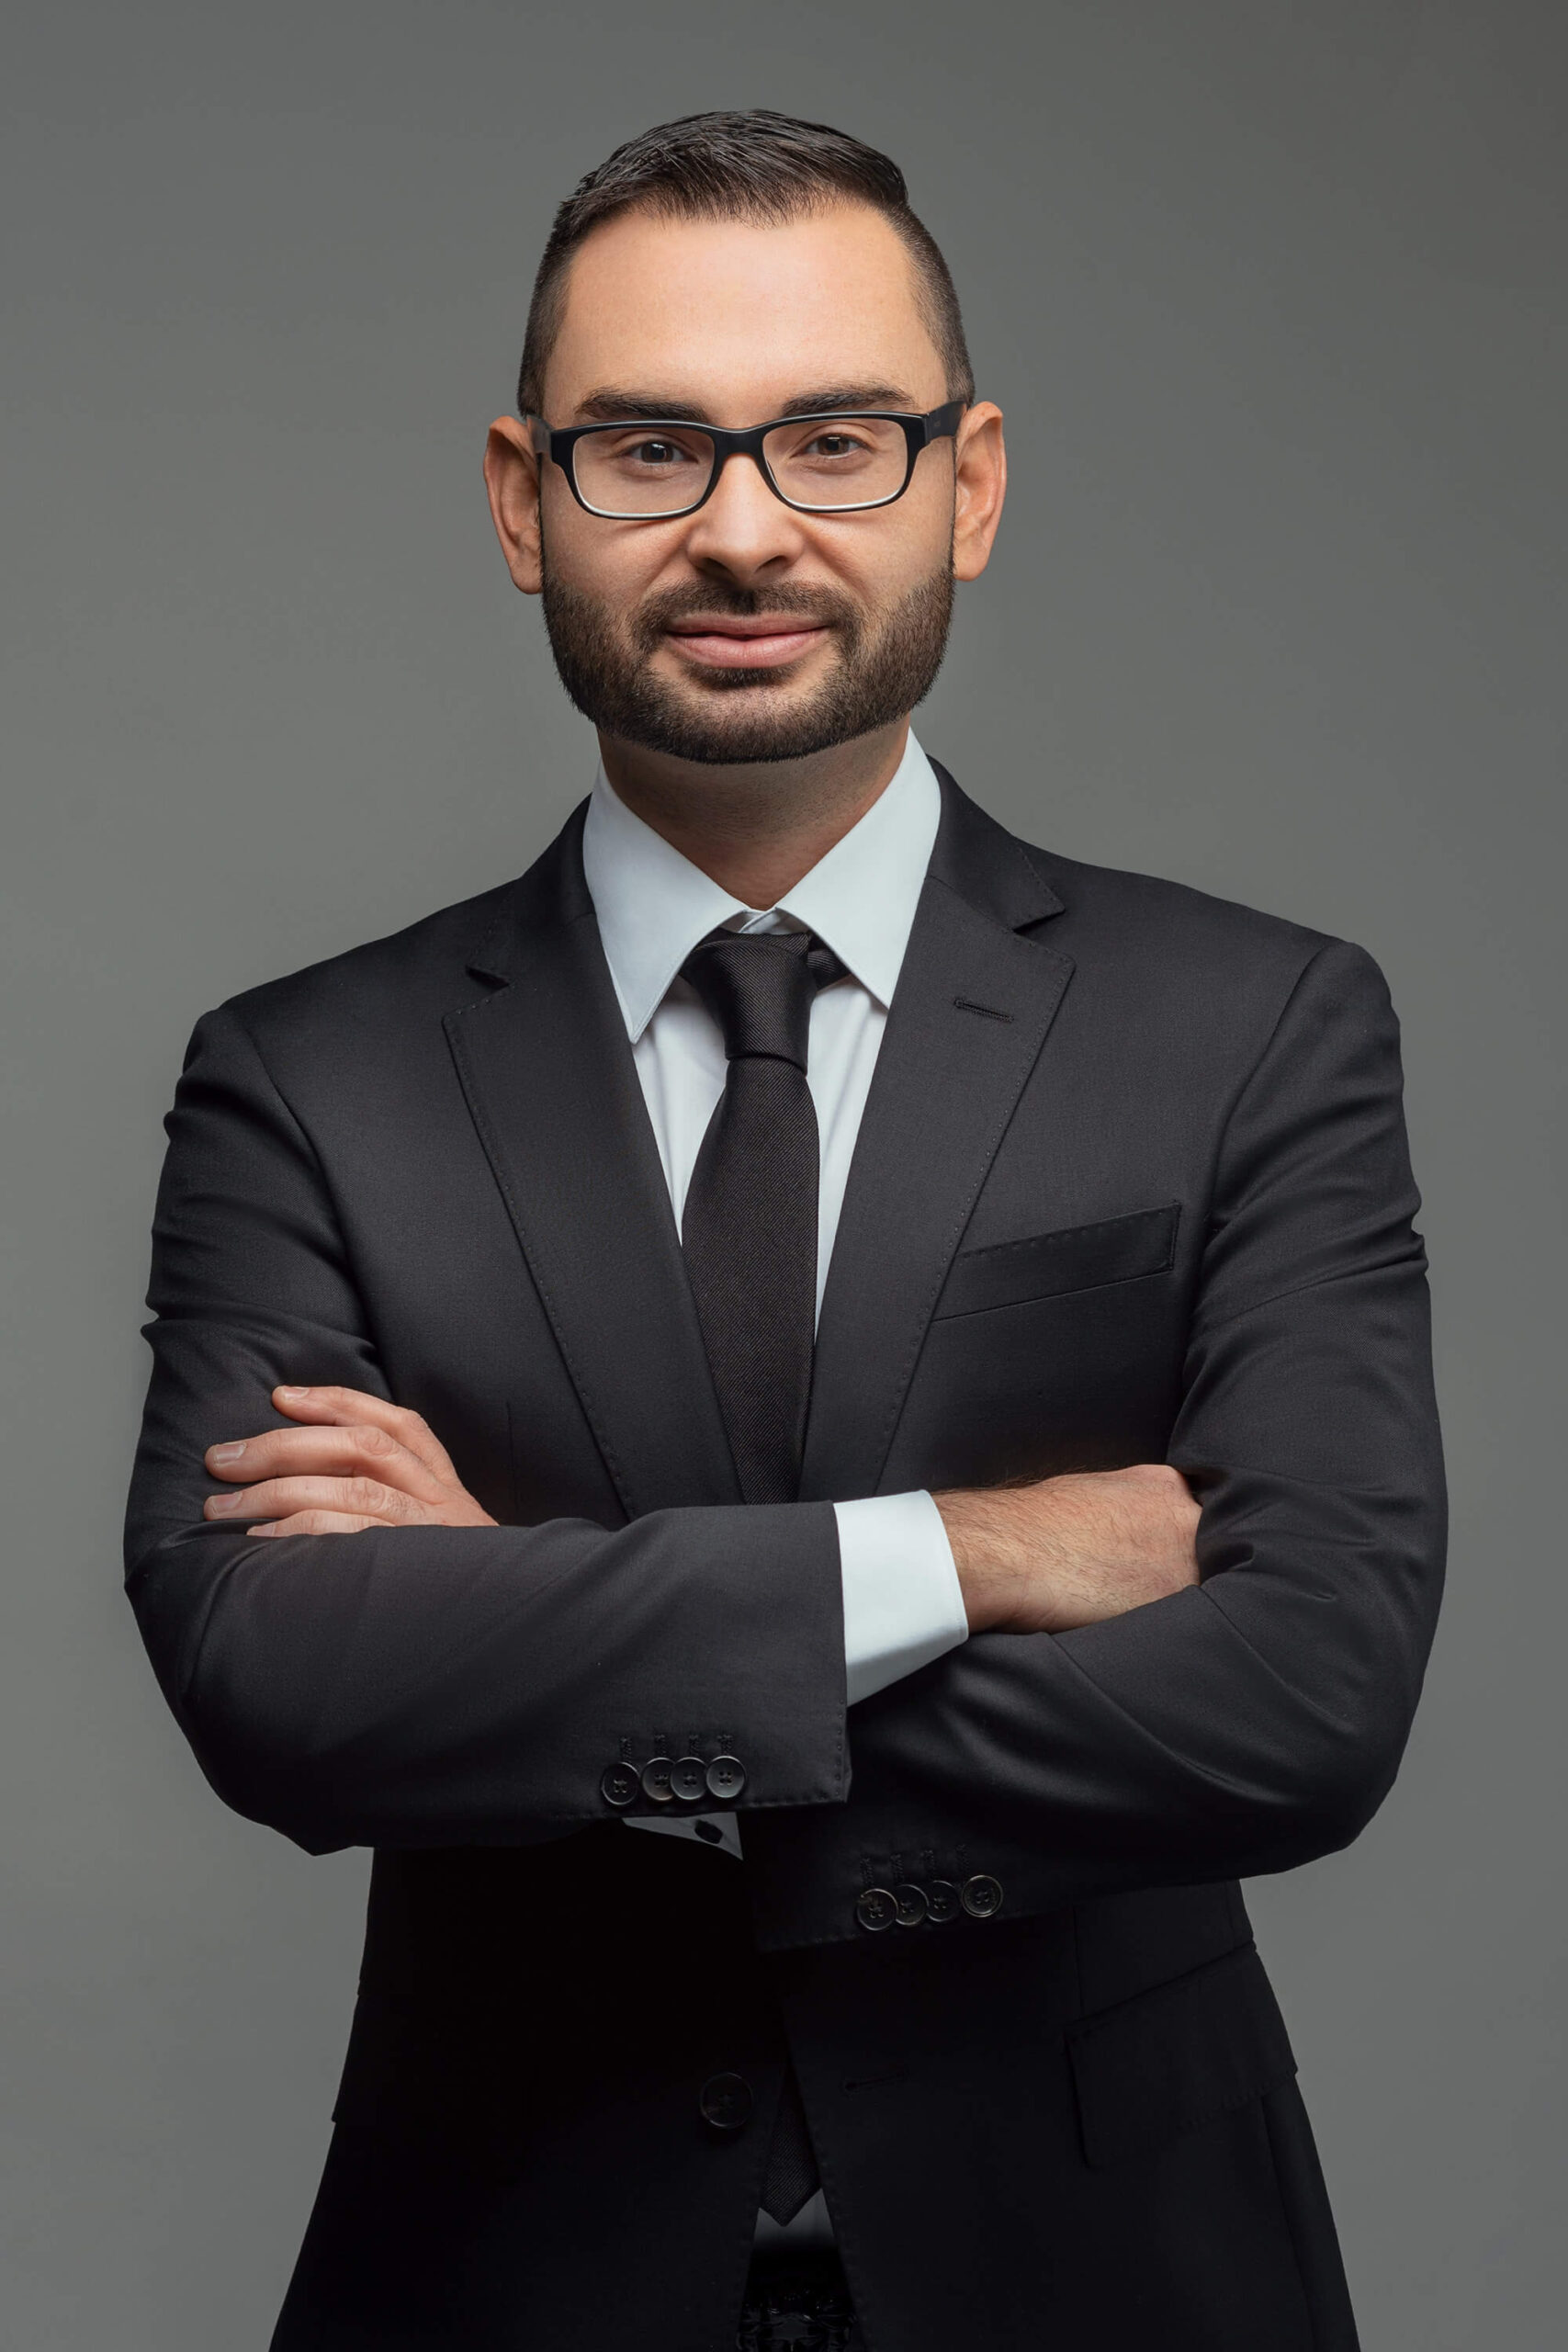 Professional headshot of a man in business attire, exuding confidence and professionalism.